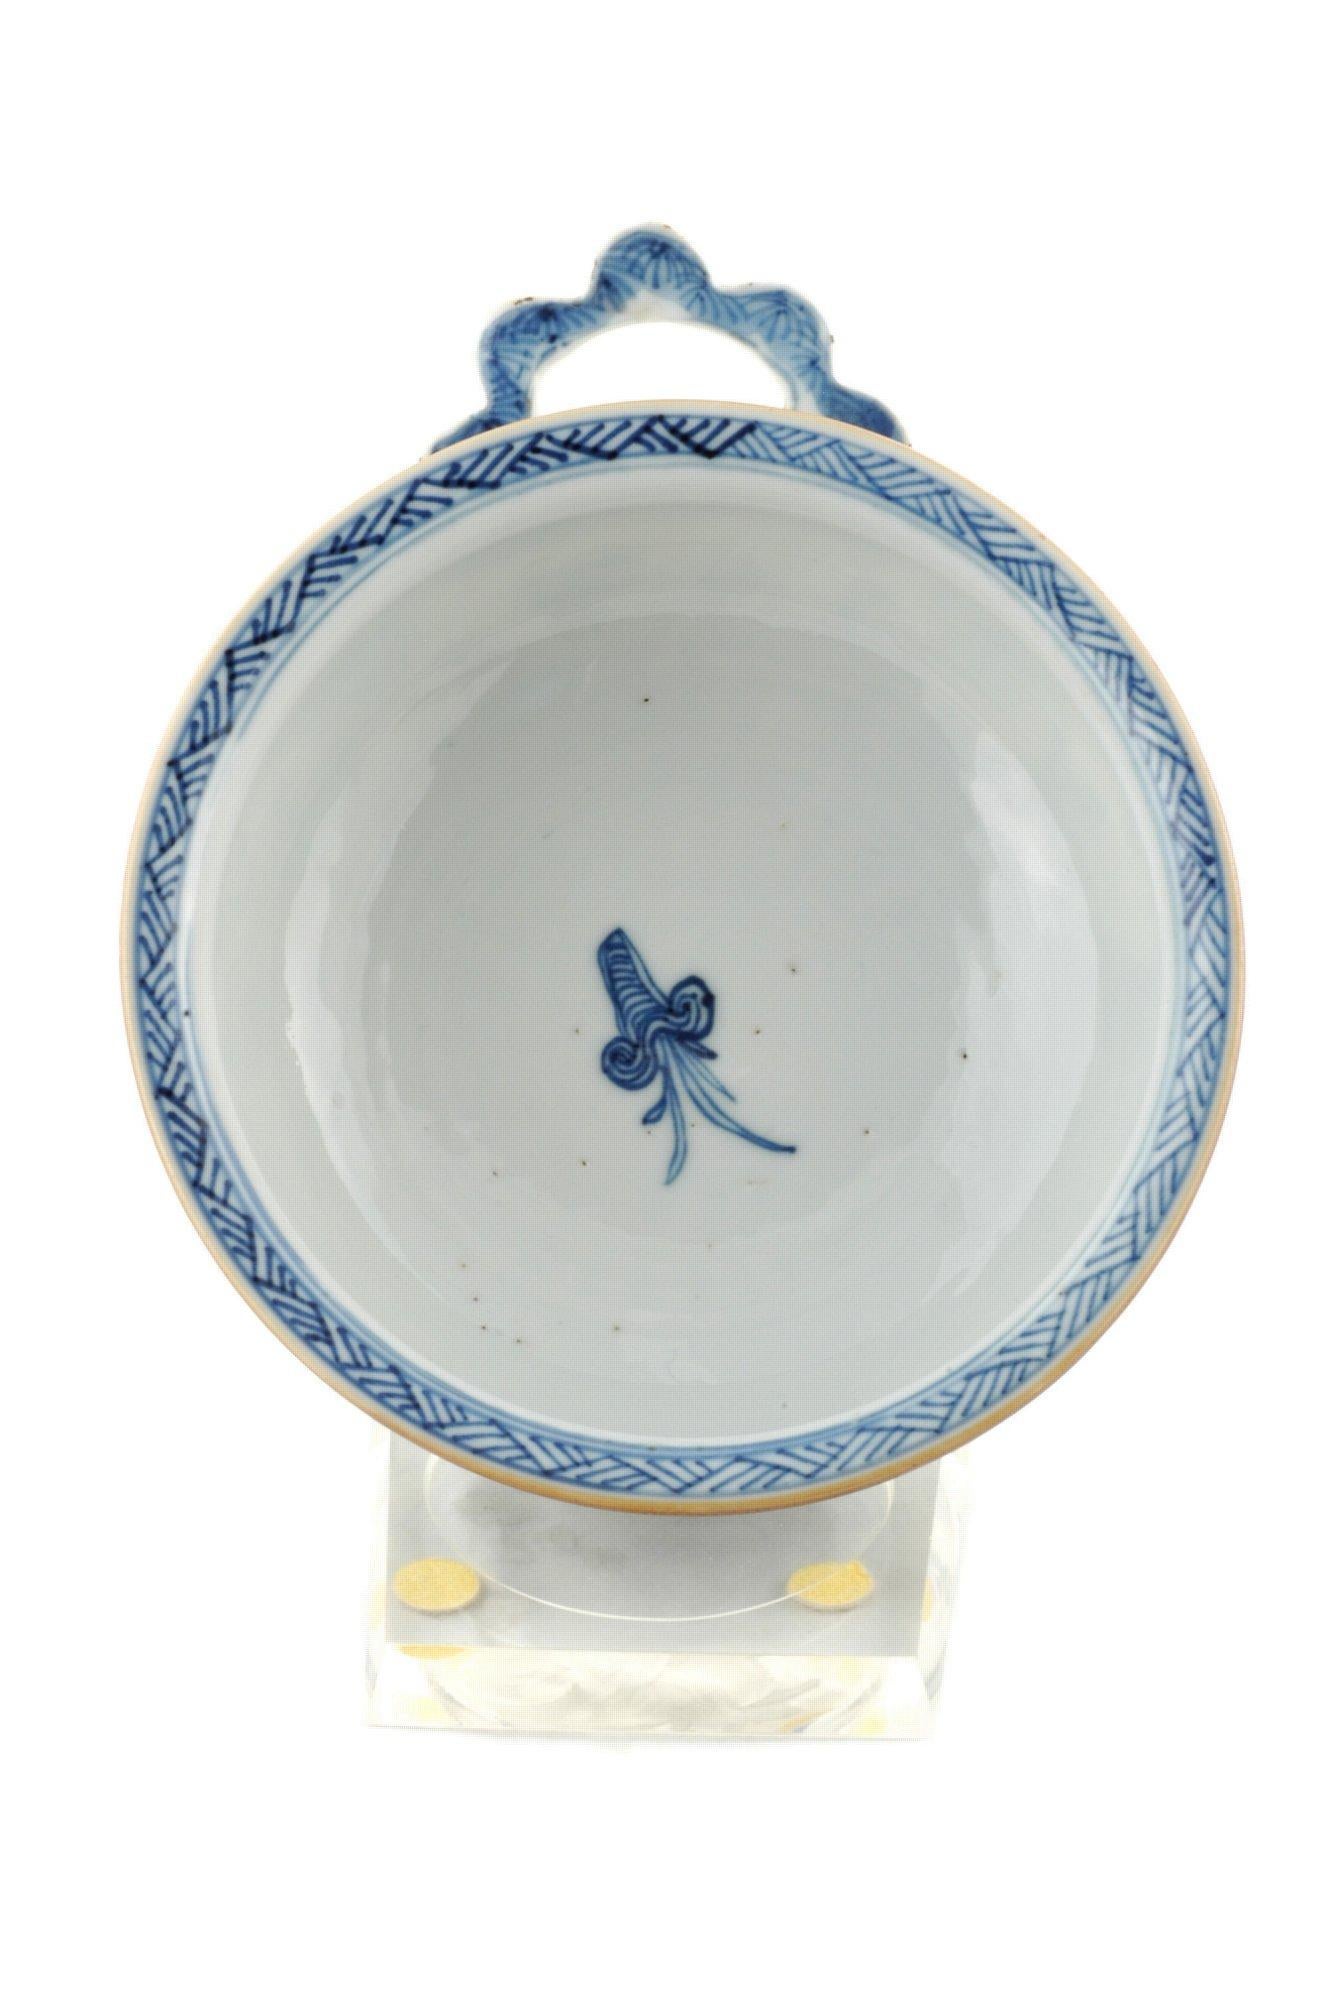 Good Chinese Export Porcelain Porringer In Good Condition For Sale In New York, NY